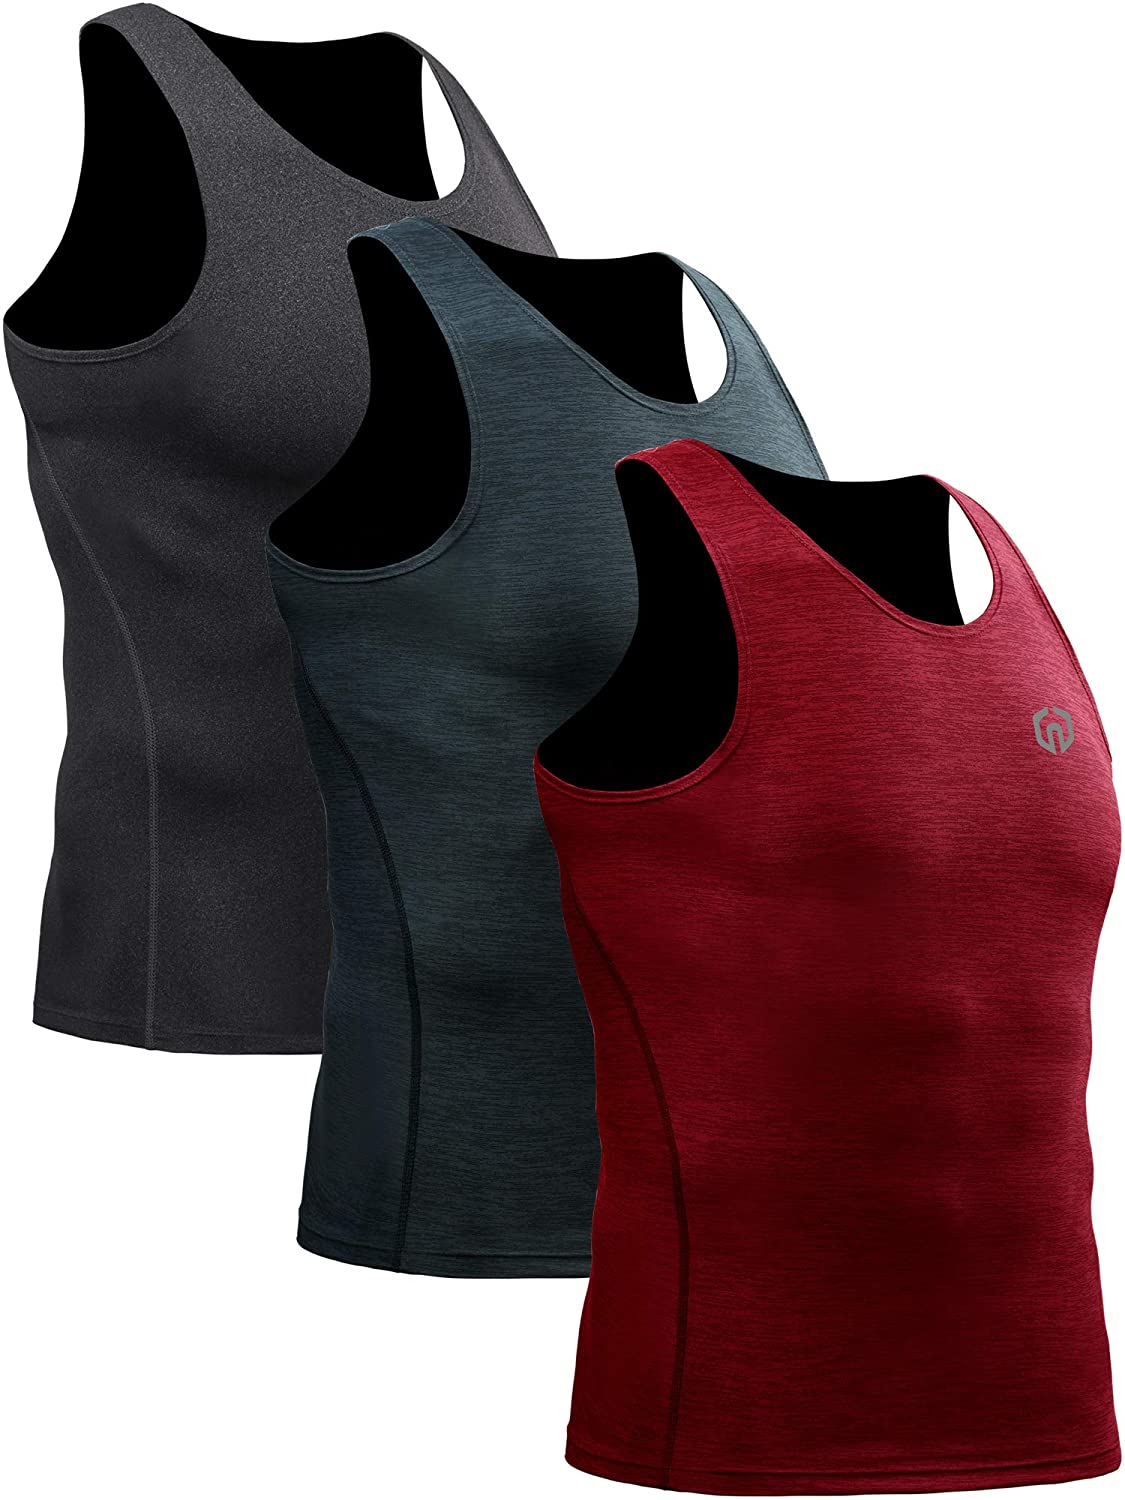 Neleus Mens 3 Pack Athletic Compression Under Base Layer Sport Tank Top NDT0001